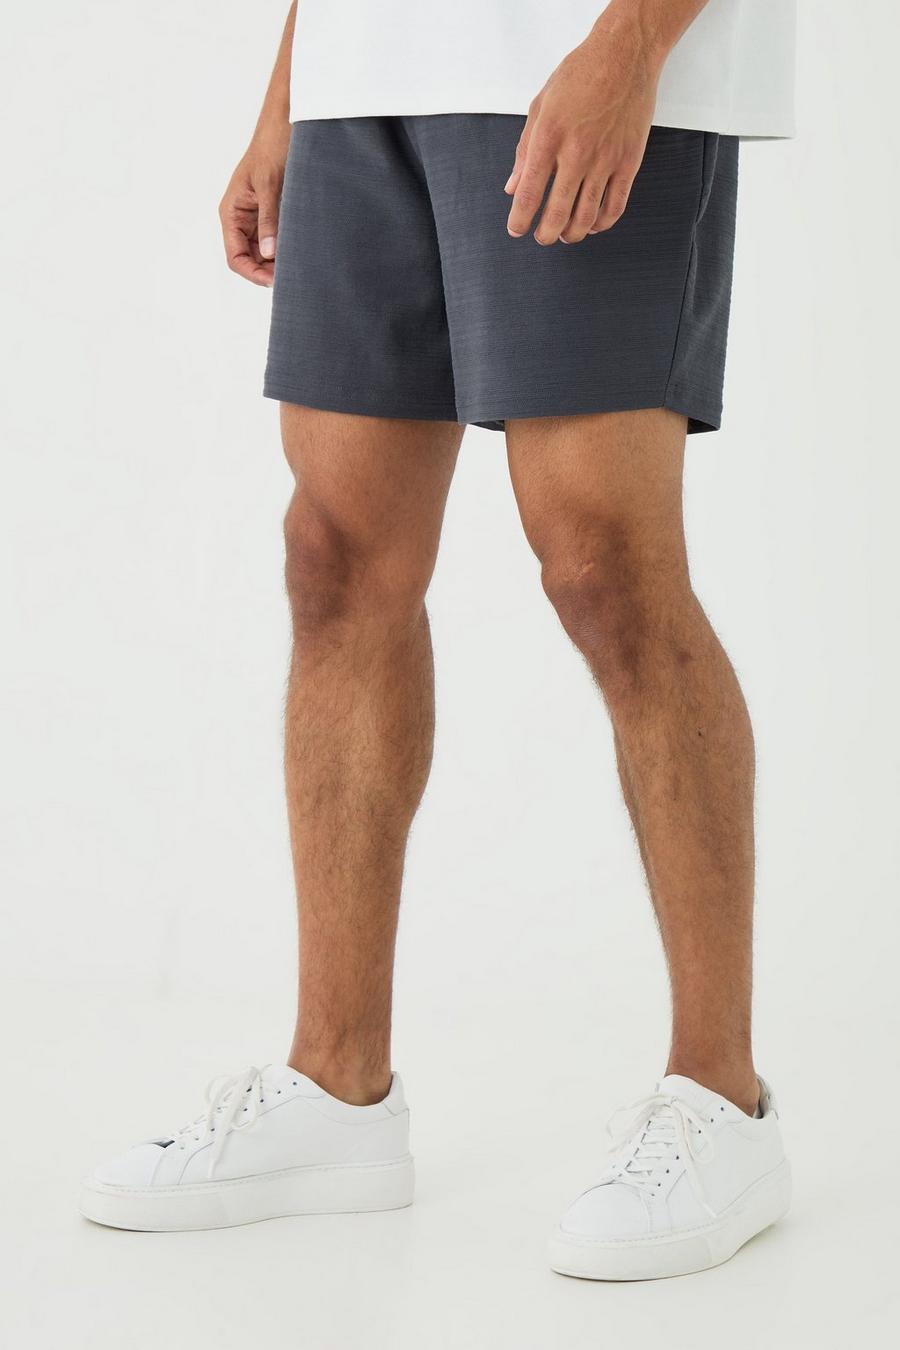 Charcoal Relaxed Fit Short Length Jacquard Striped Short